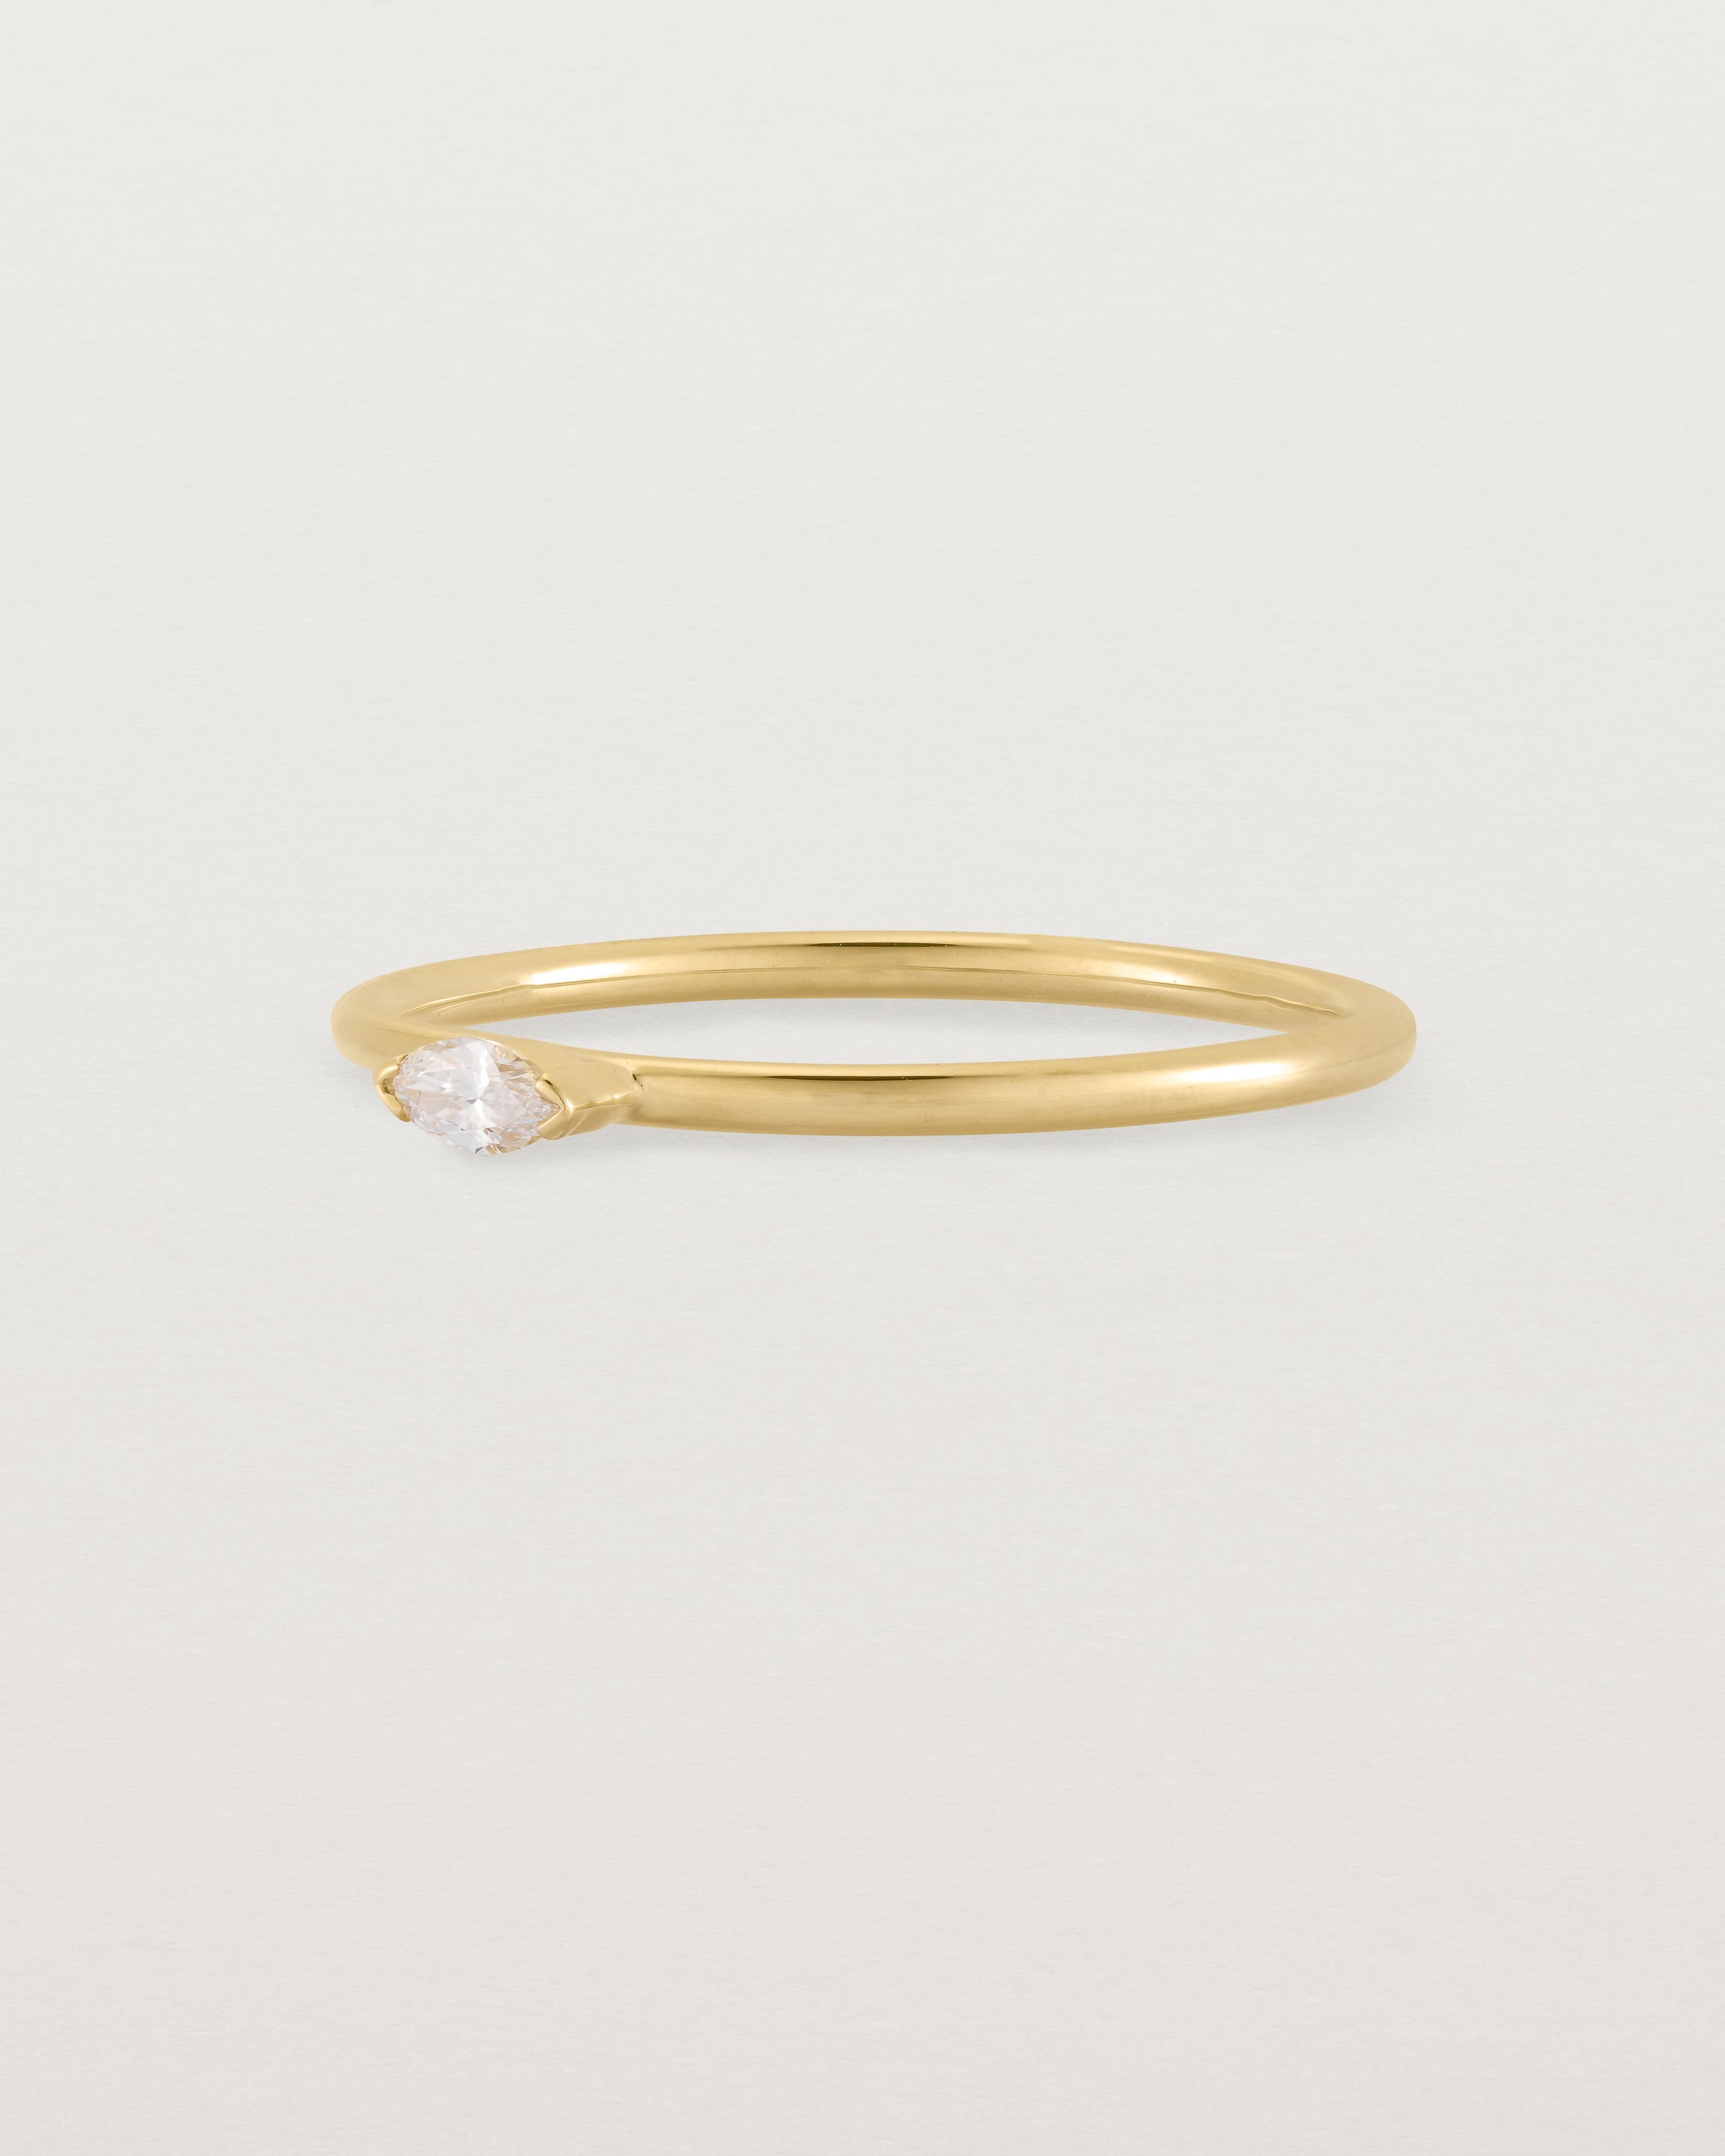 Fine yellow gold stacking ring featuring a white marquise centre diamond